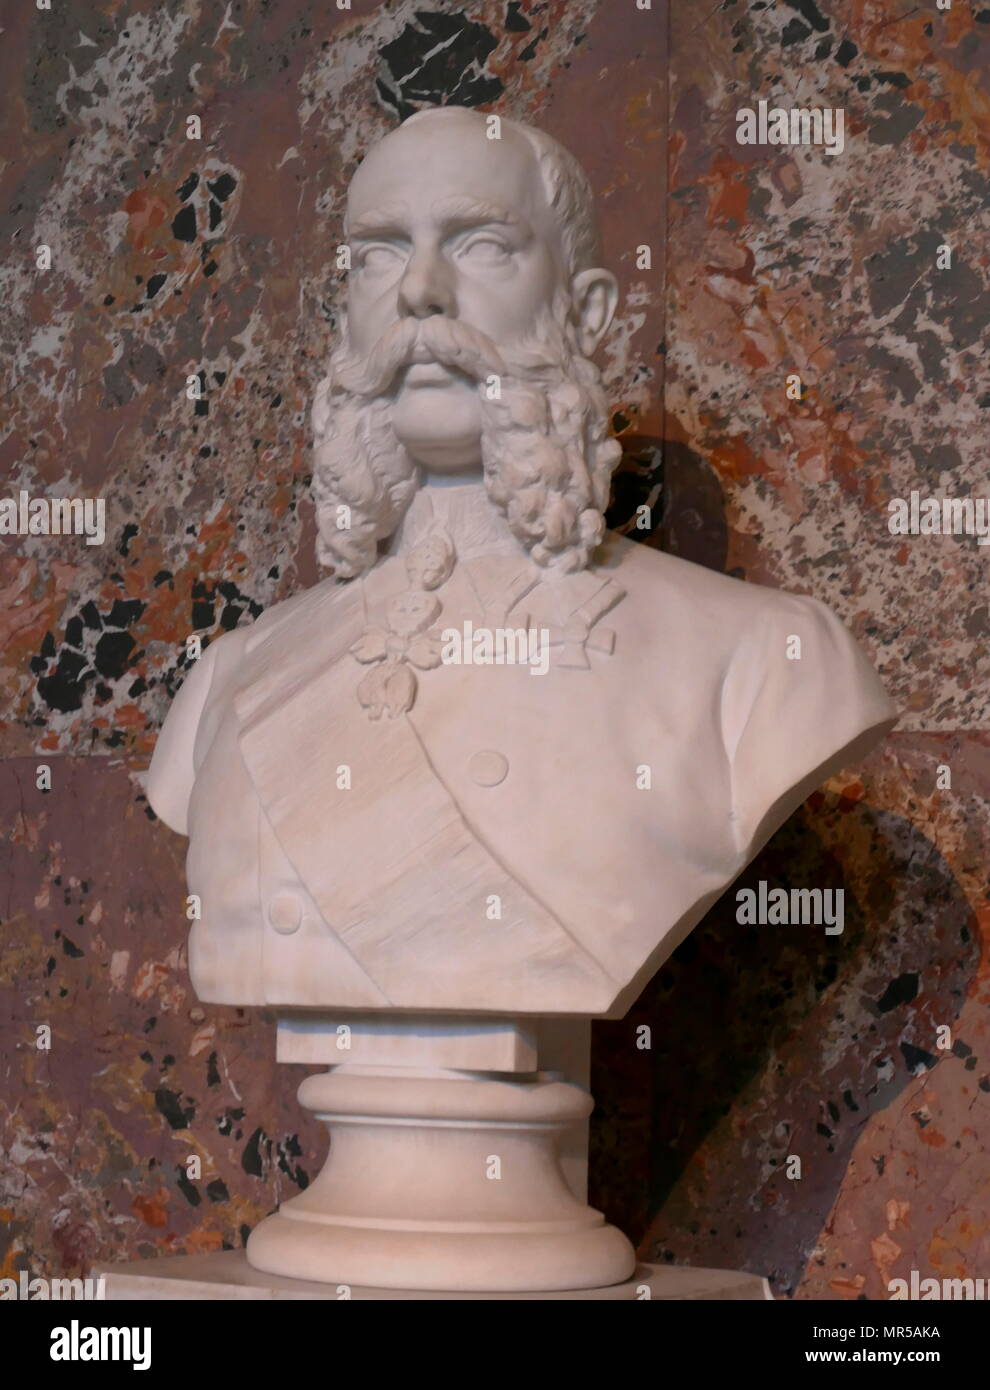 Bust of Franz Joseph I by Caspar Zumbusch 1873. Franz Joseph I (1830 – 1916) was Emperor of Austria and King of Hungary from 2 December 1848 until his death on 21 November 1916. Kaspar Zumbusch (1830 – 1915), was a German sculptor, born at Herzebrock, Westphalia, who became a pre-eminent sculptor of neo-Baroque monuments in Vienna. Stock Photo